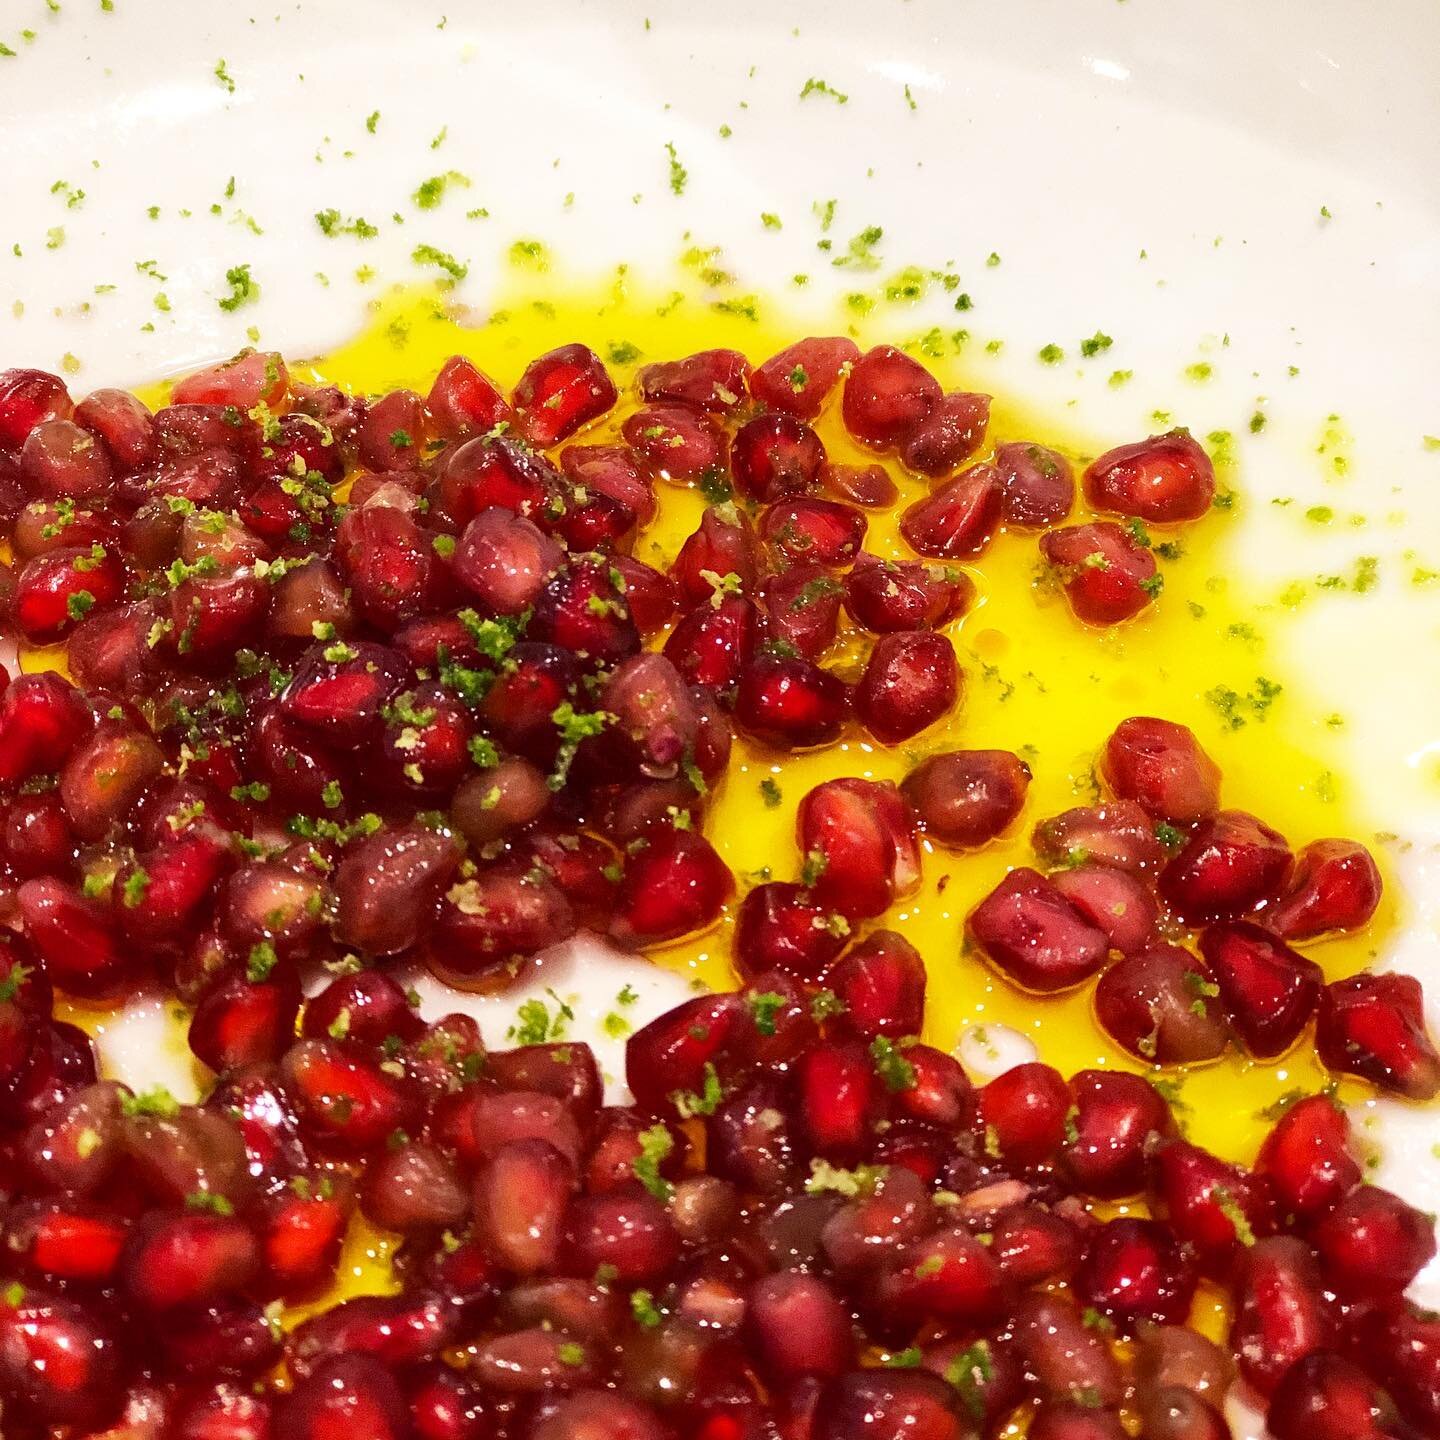 Can we just all pause for a moment during these mad times and appreciate Mother Nature&rsquo;s bounty! I mean look at these colours! The smell is amazing!! And it tastes soooo good! Every sense is satisfied! #pomegranateseeds #rapeseedoil #limezest #